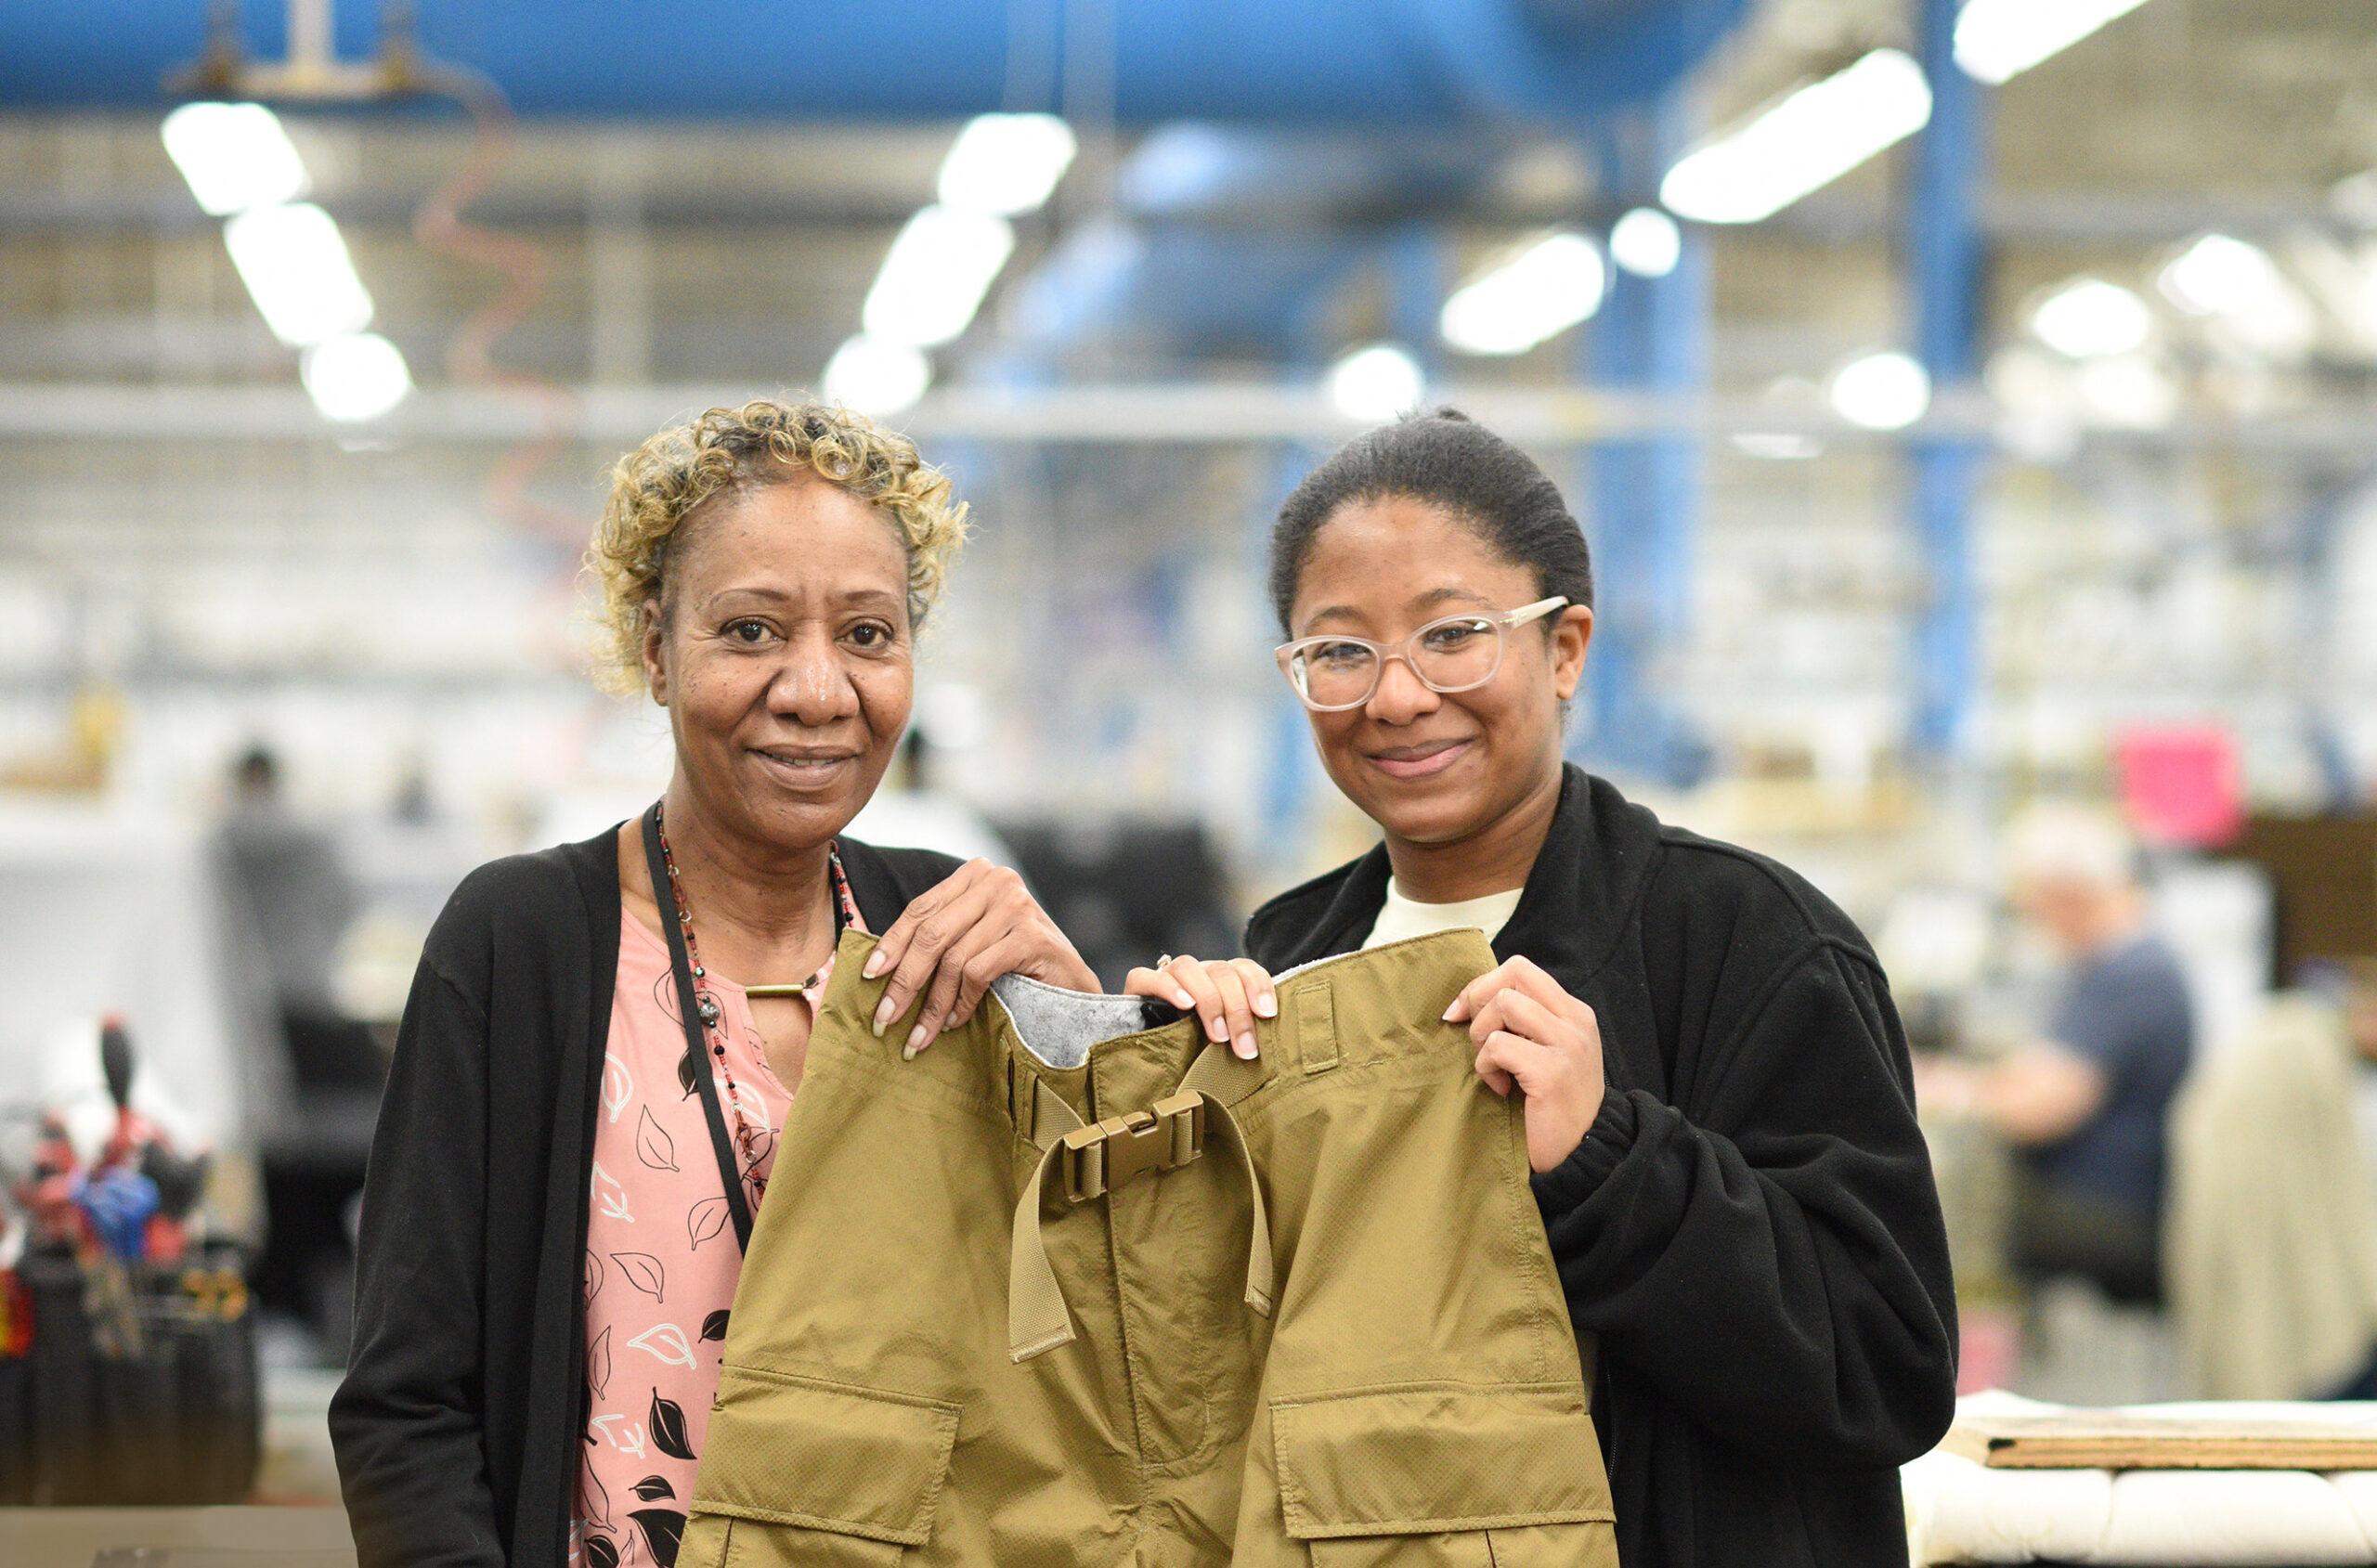 IFB Solutions employees JoAnn Dean (left), and Denesha Scales (right) holding a Fuel Handler’s Suit